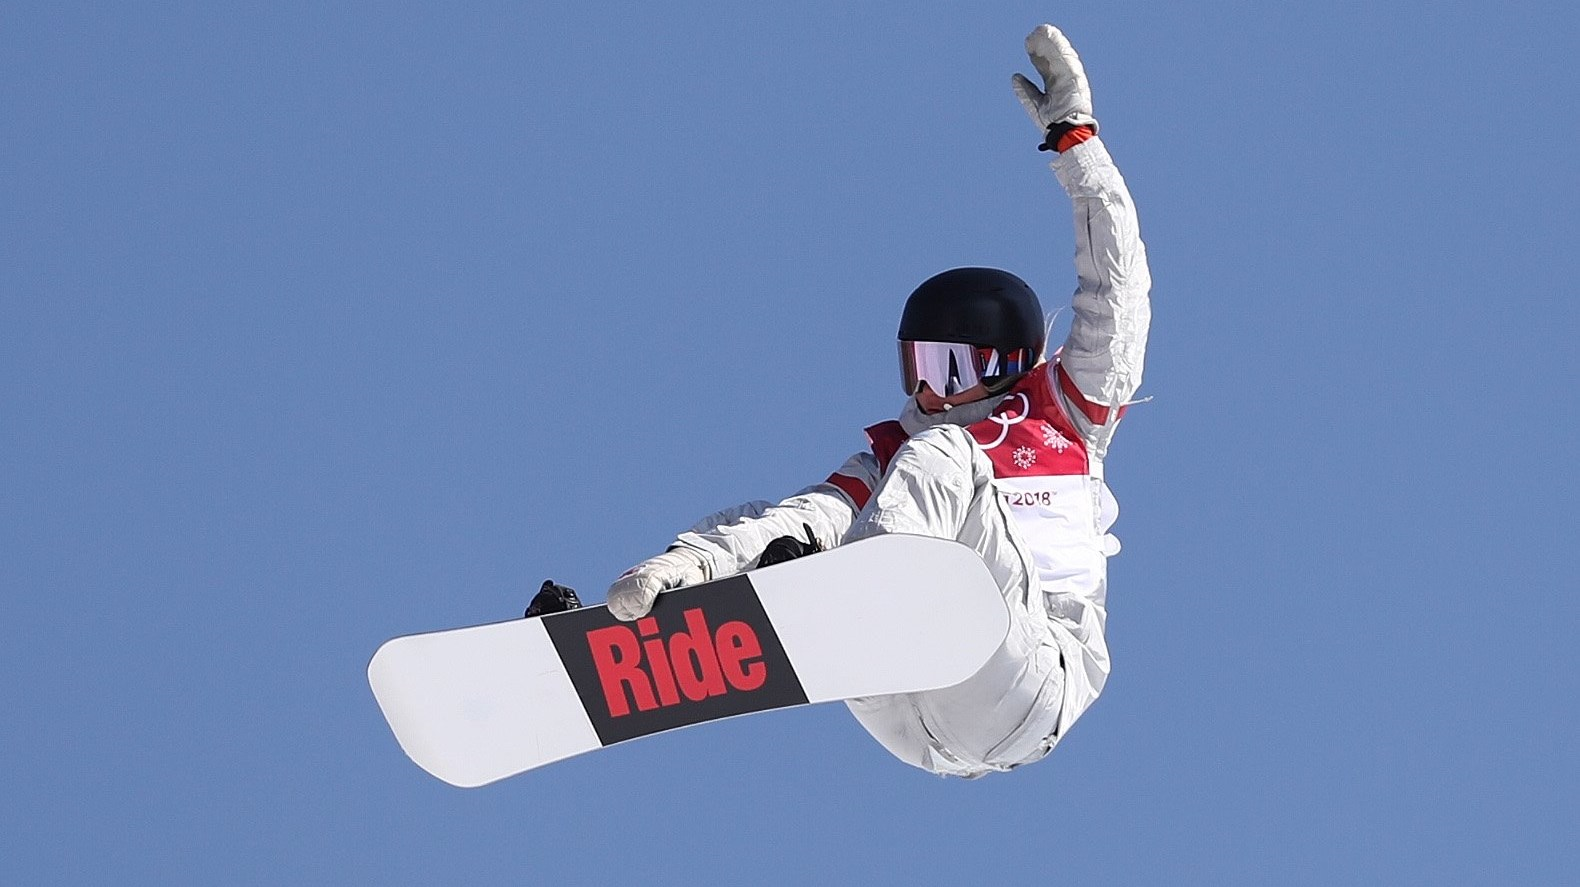 Jenson finishes 11th in first-ever Olympic big air final